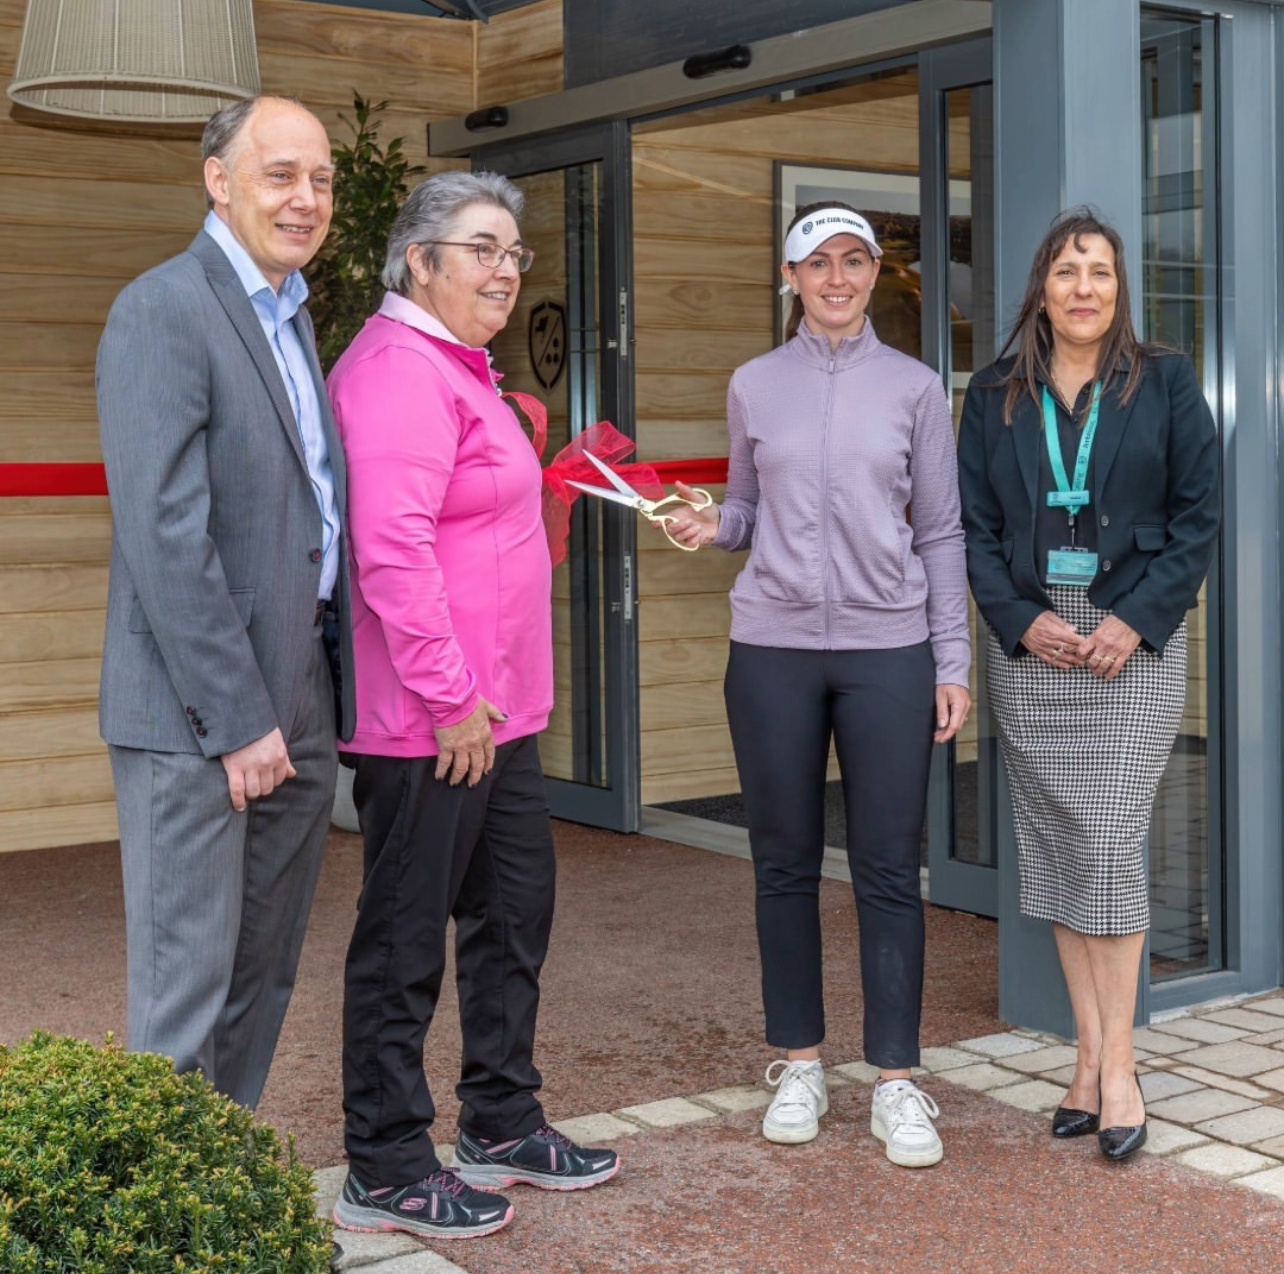 Cams Hall Estate’s health club opening